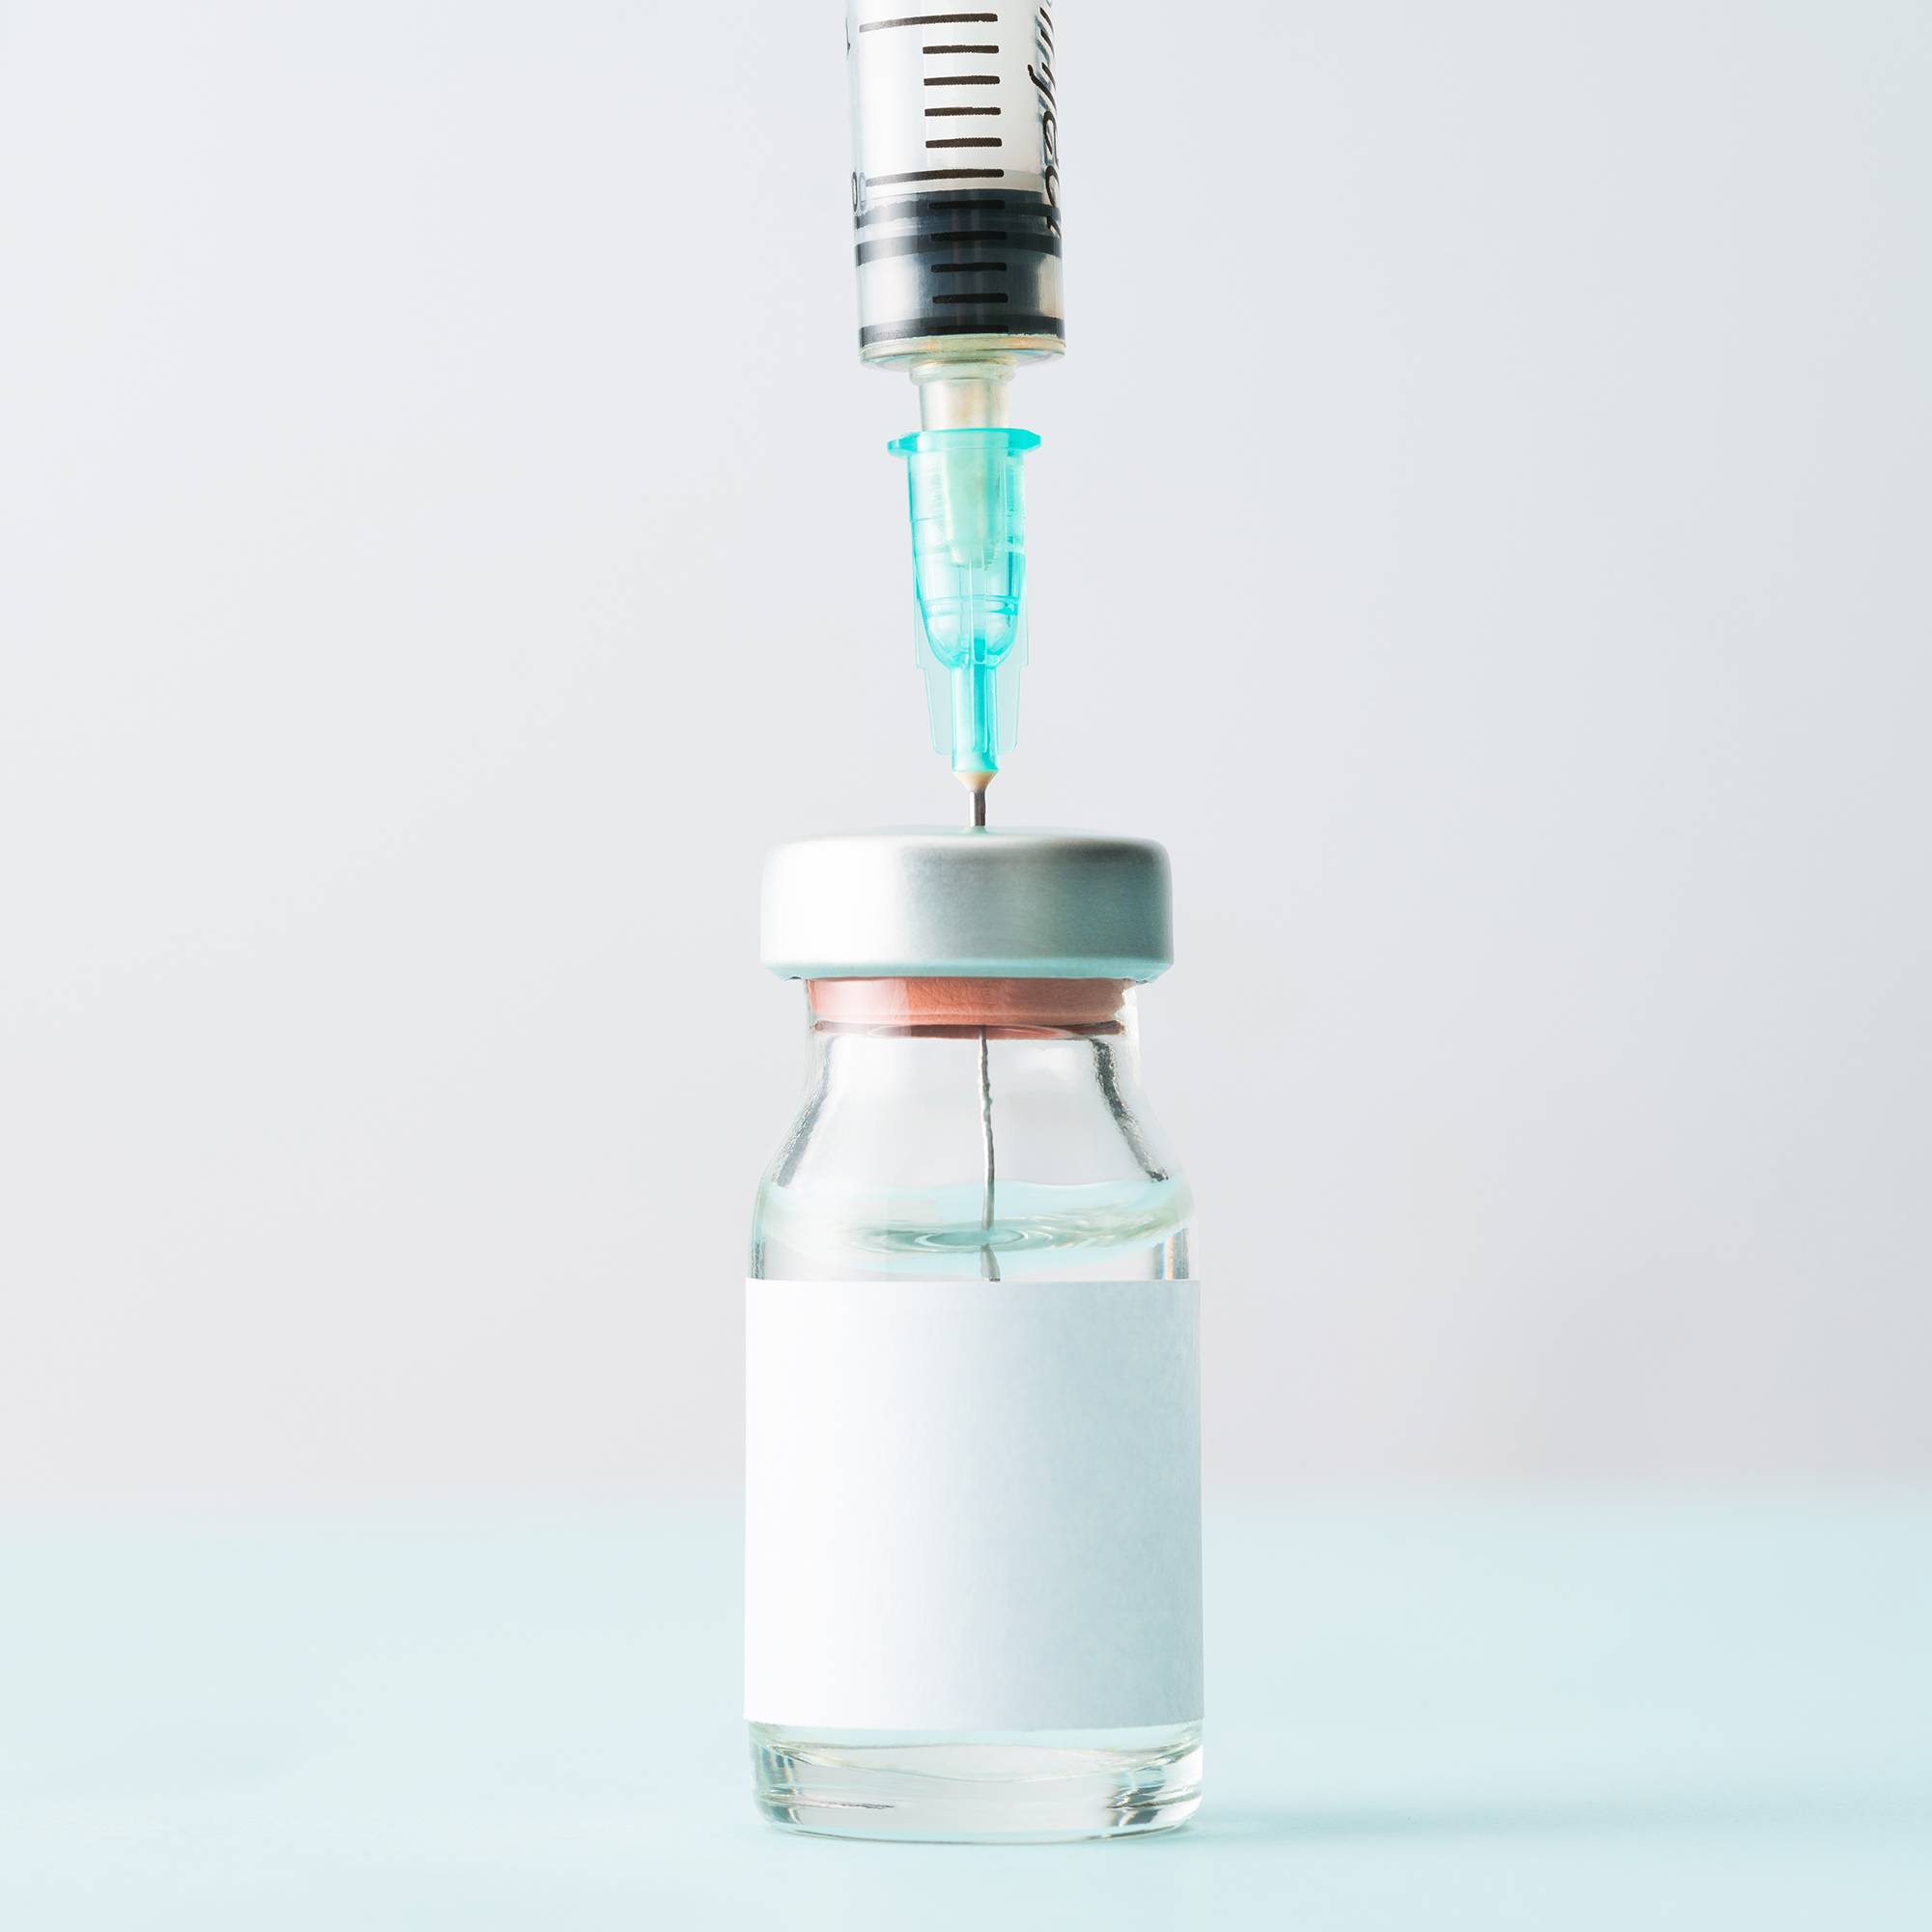 Could COVID-19 vaccines become mandatory in the U.S.? | Hub